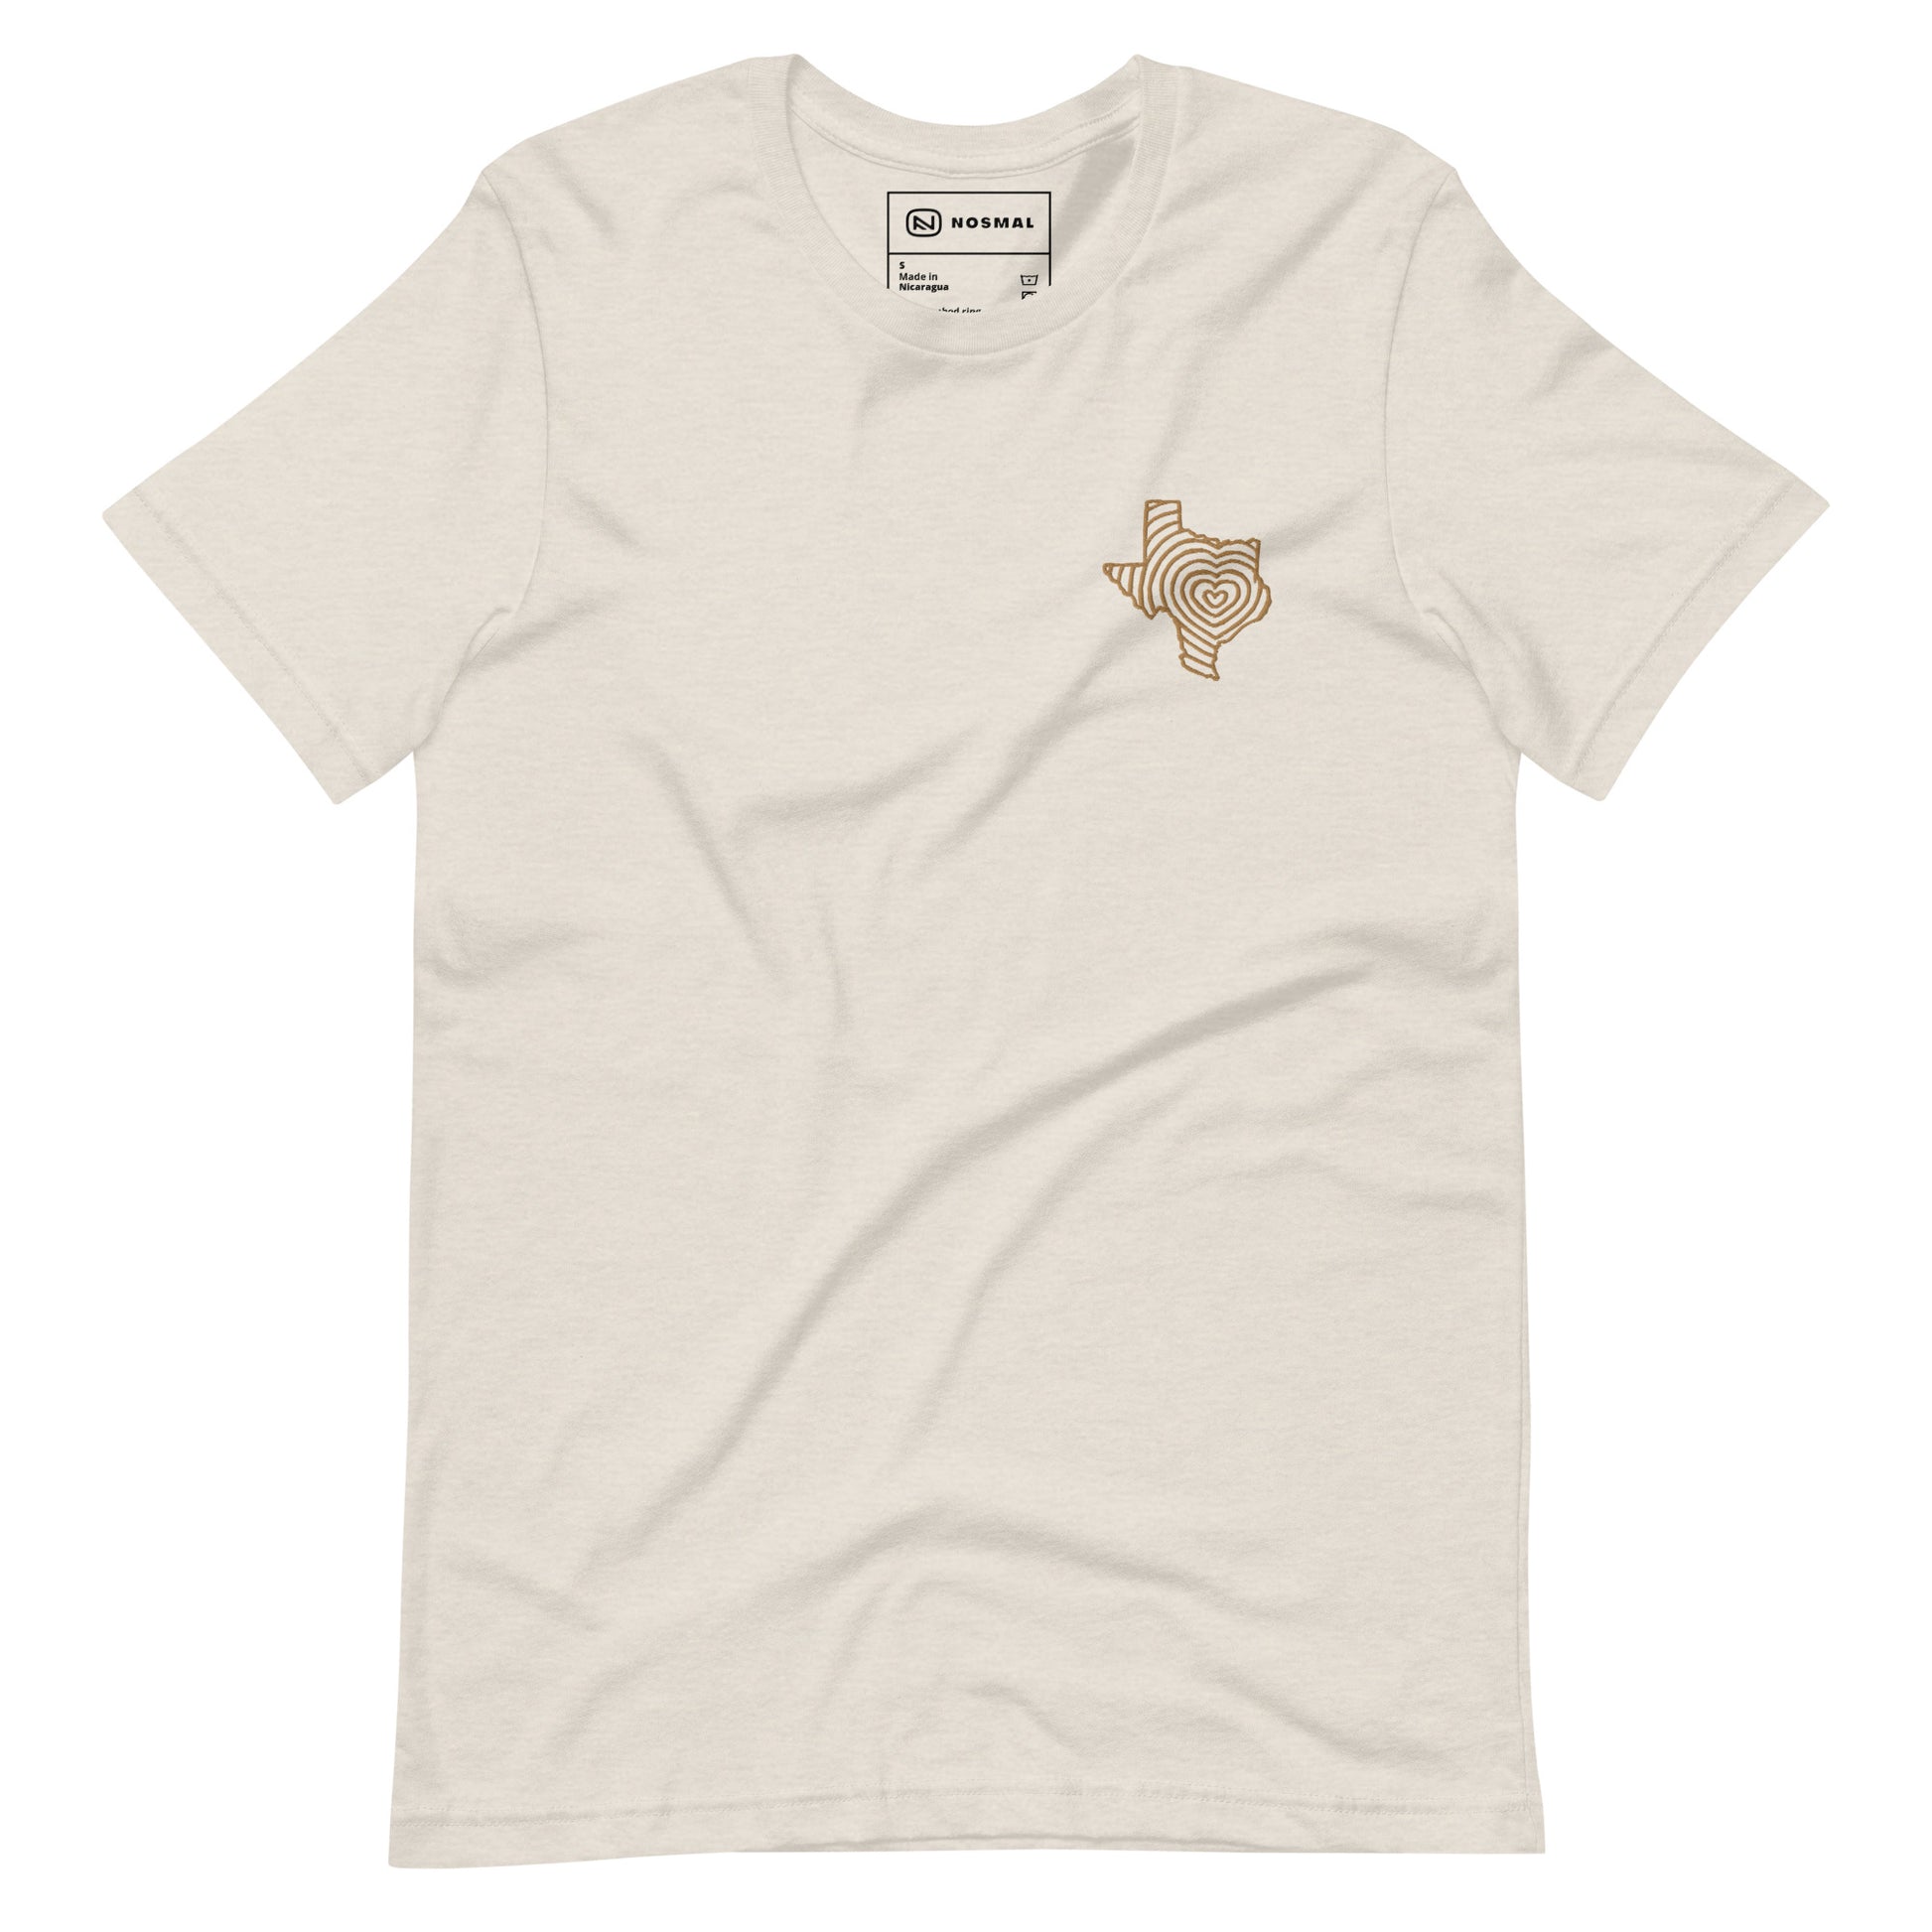 Straight on view of heartbeat of texas gold embroidered design on heather dust unisex t-shirt.